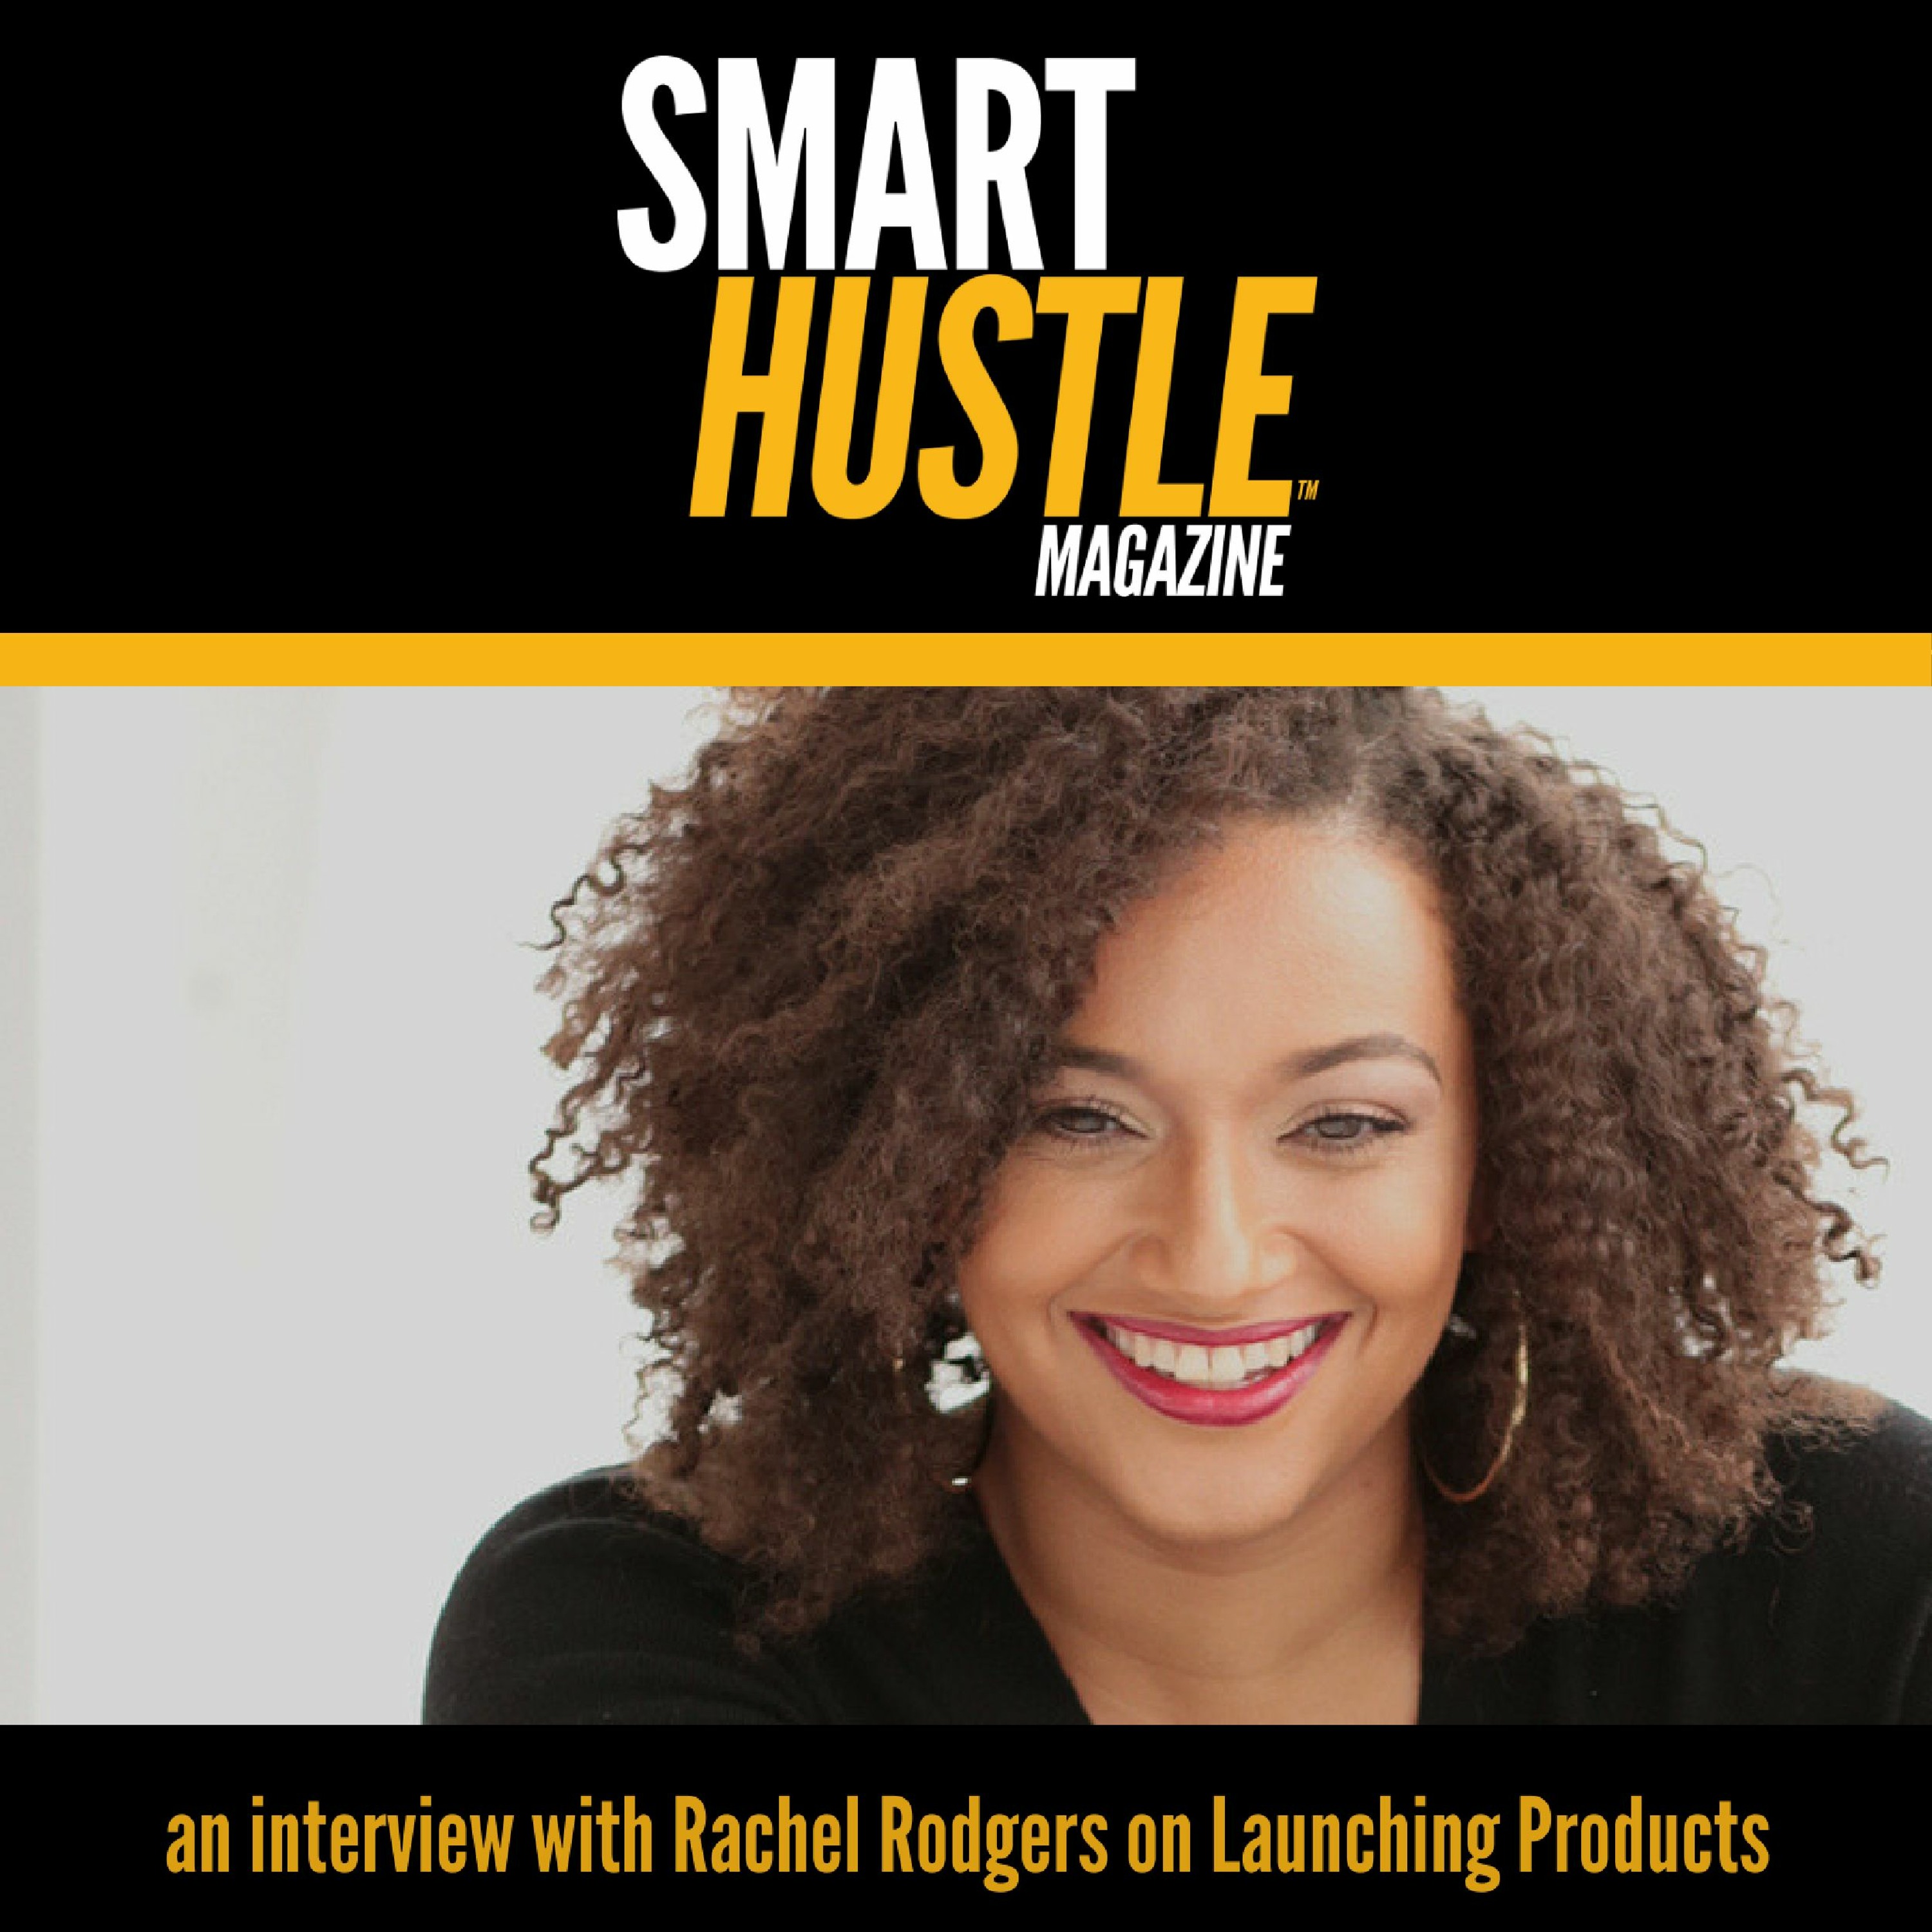 Smart Hustle Interview: Rachel Rodgers on Launching Products